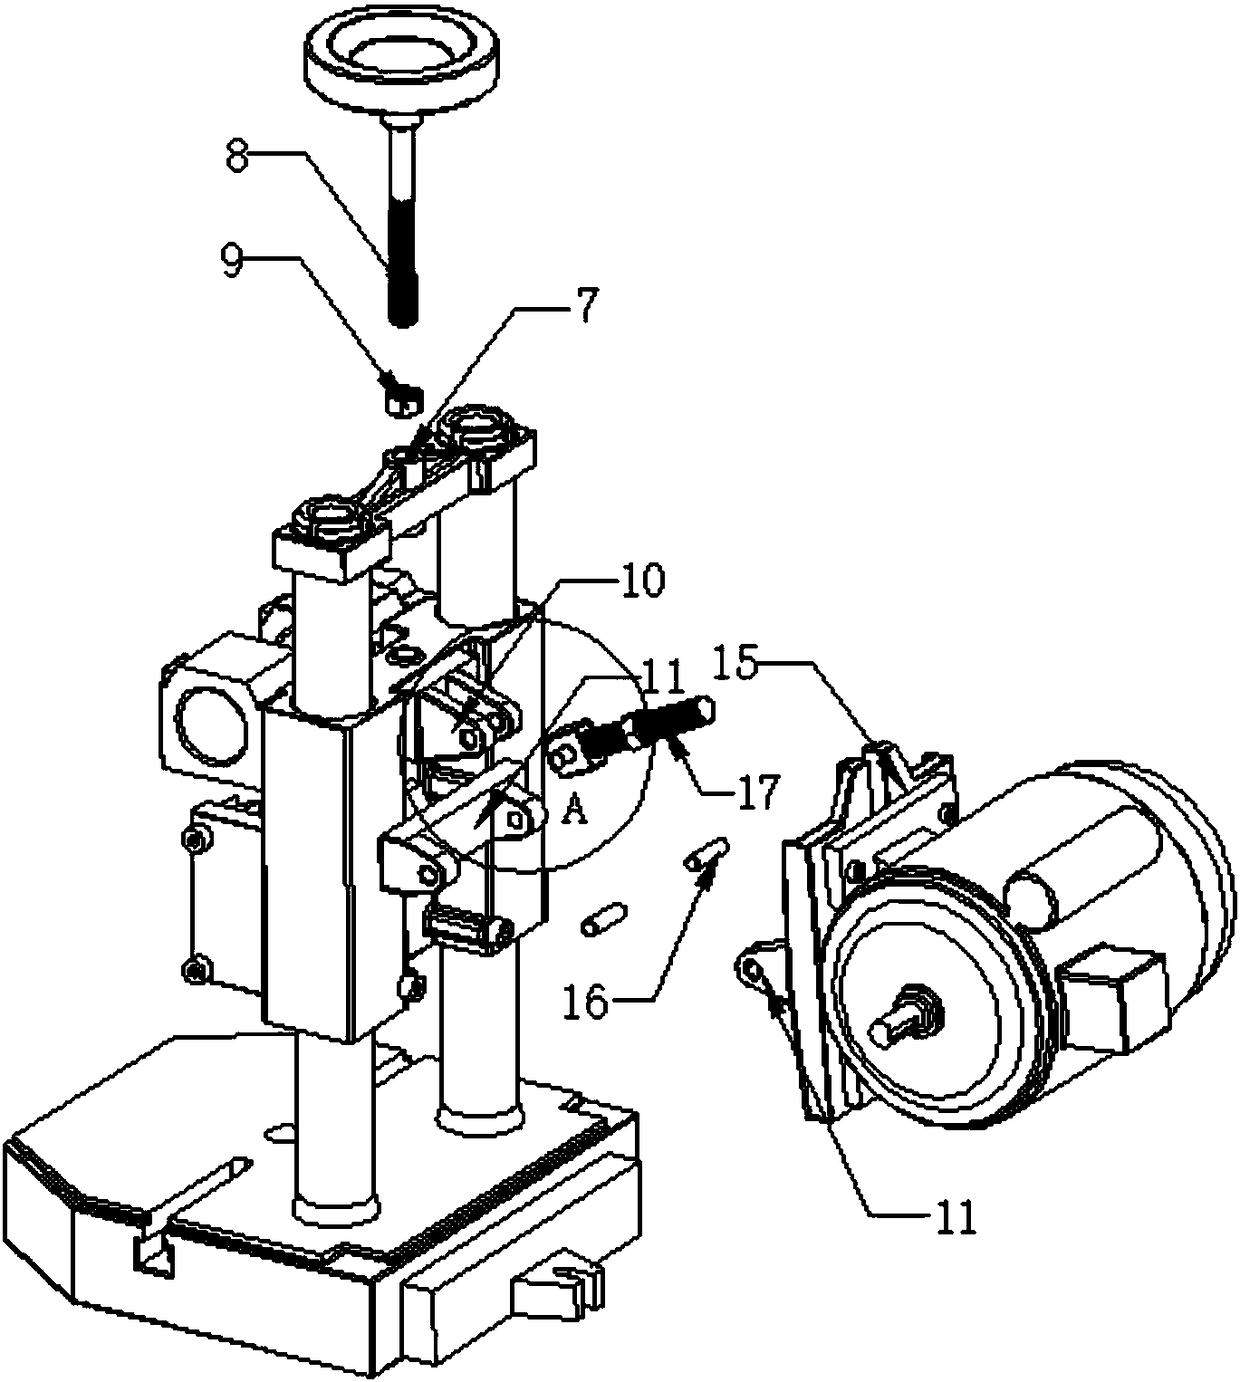 Supporting and fixing device of motor for conveyer belt